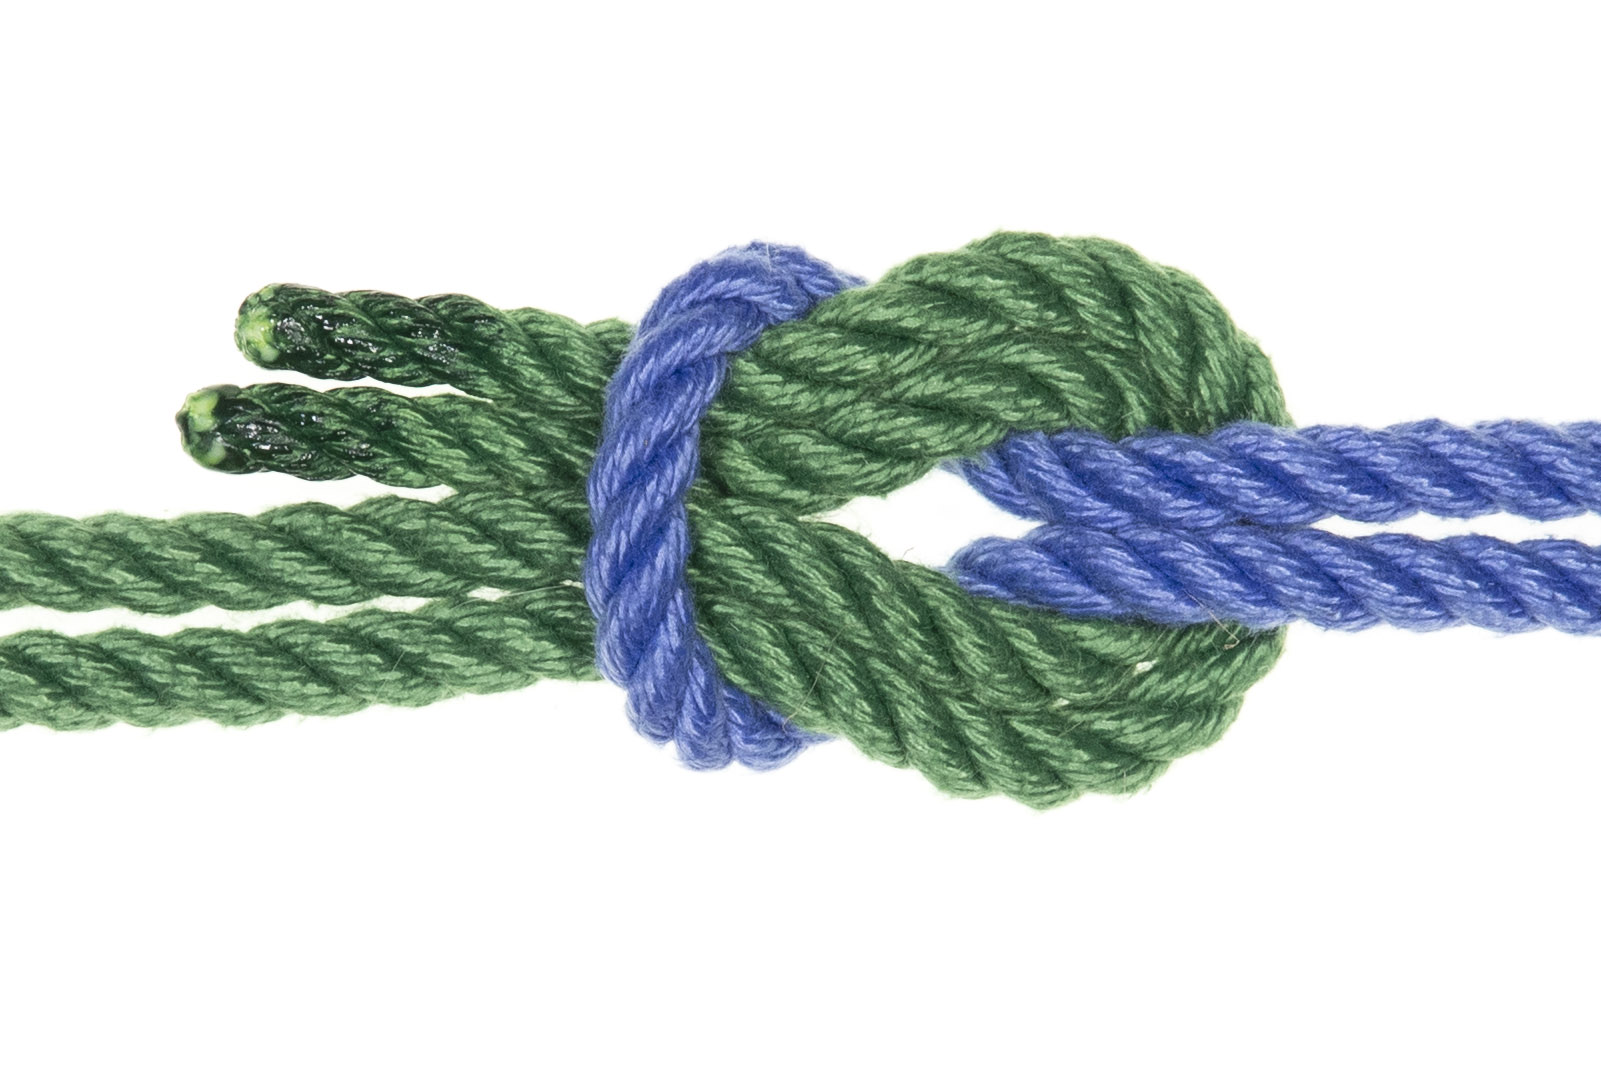 Doubled green and blue ropes threaded together to form a sheet bend knot.